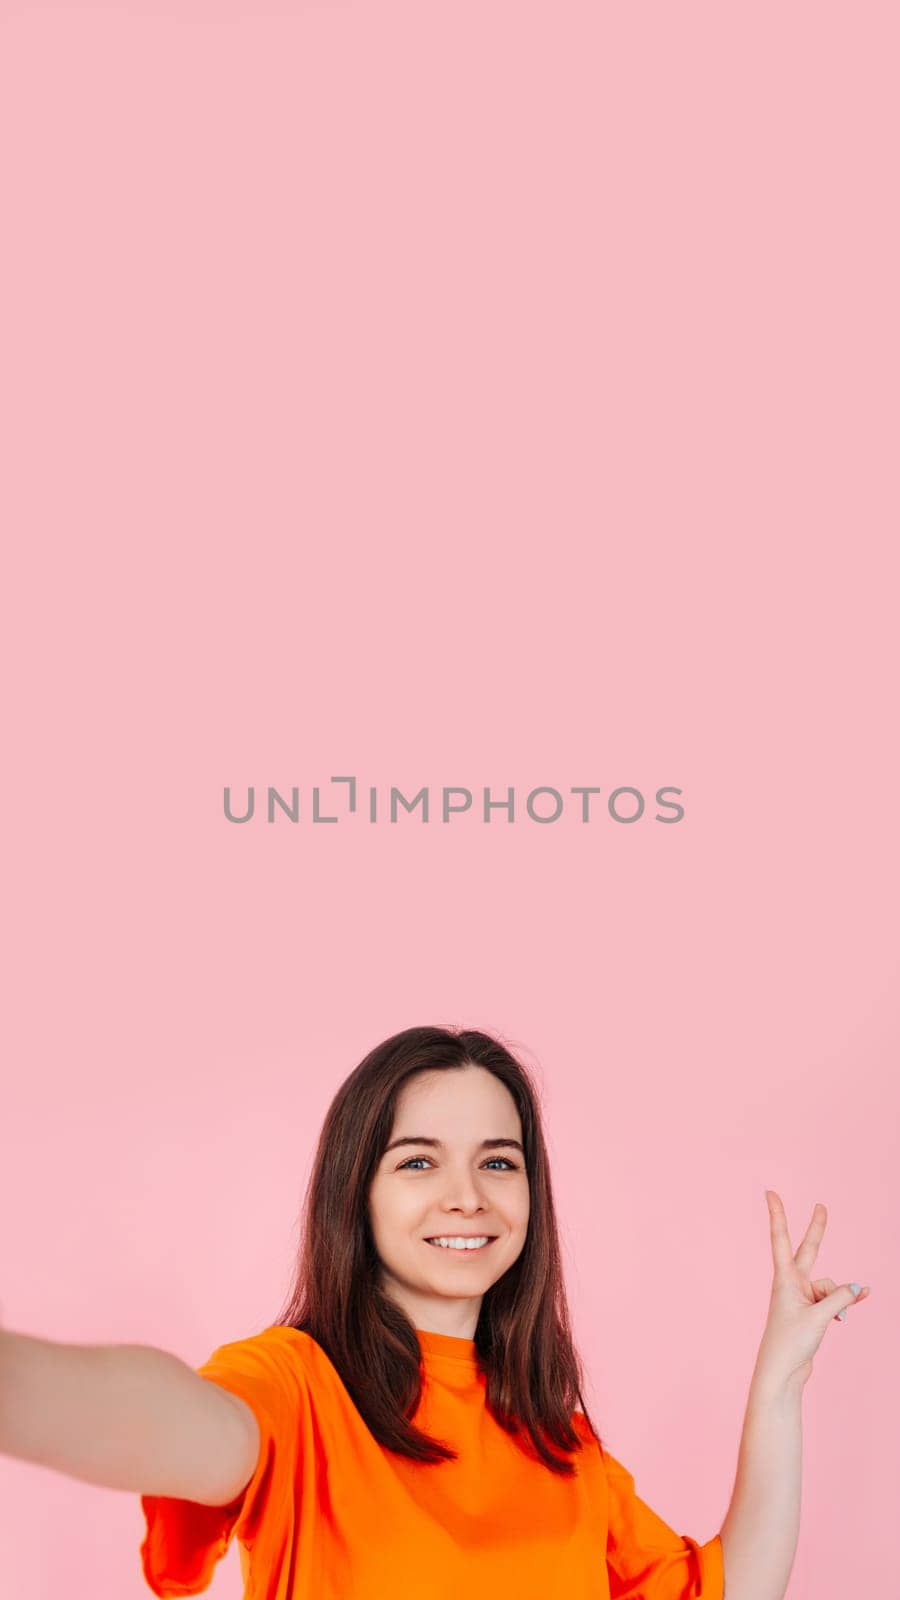 A vivaciously stunning girl with a radiant smile, confidently showing the V sign with her fingers. On a pink background. Blank space to add text or graphics for party, holiday and promotional design by ViShark